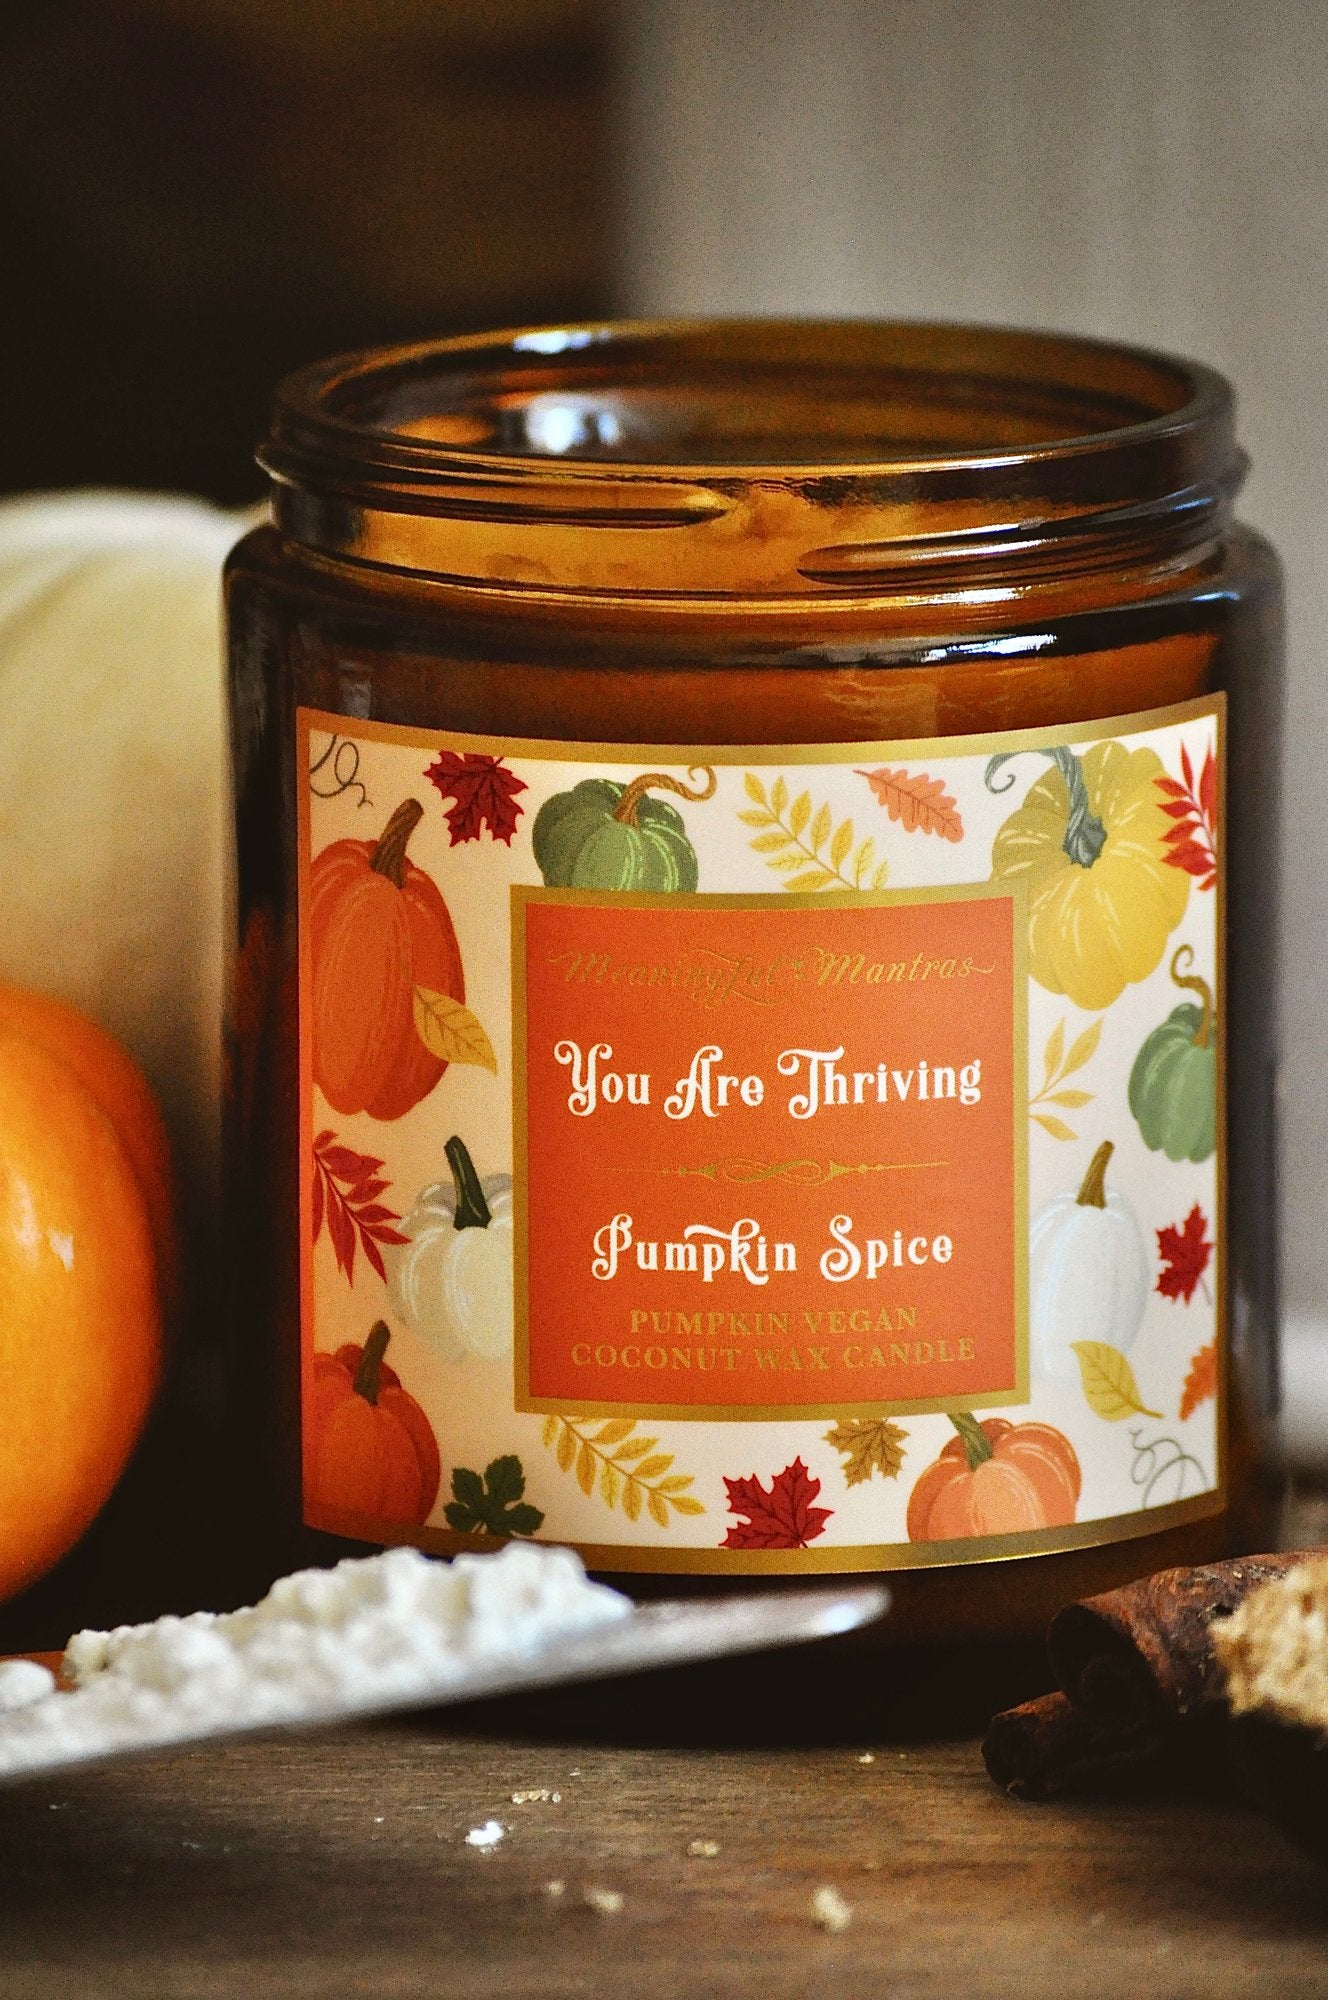 You Are Thriving Pumpkin Spice Candle